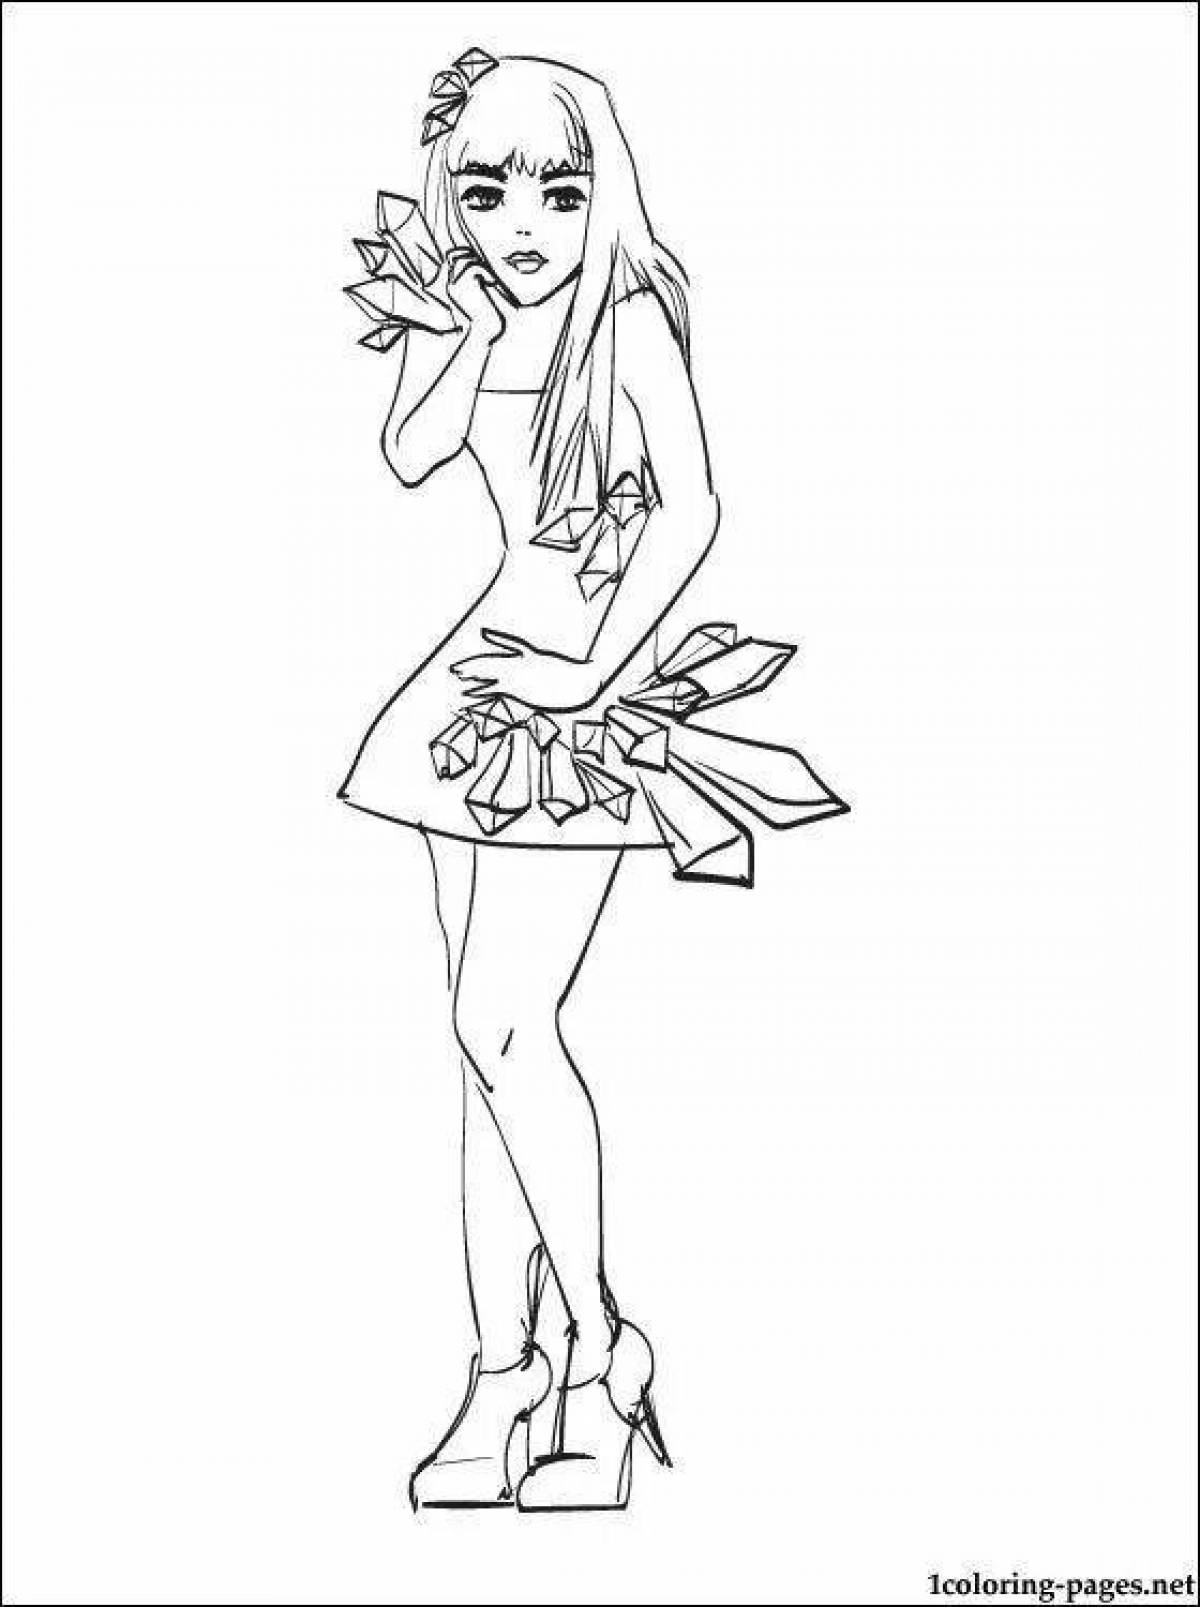 Gorgeous lady gaga coloring page